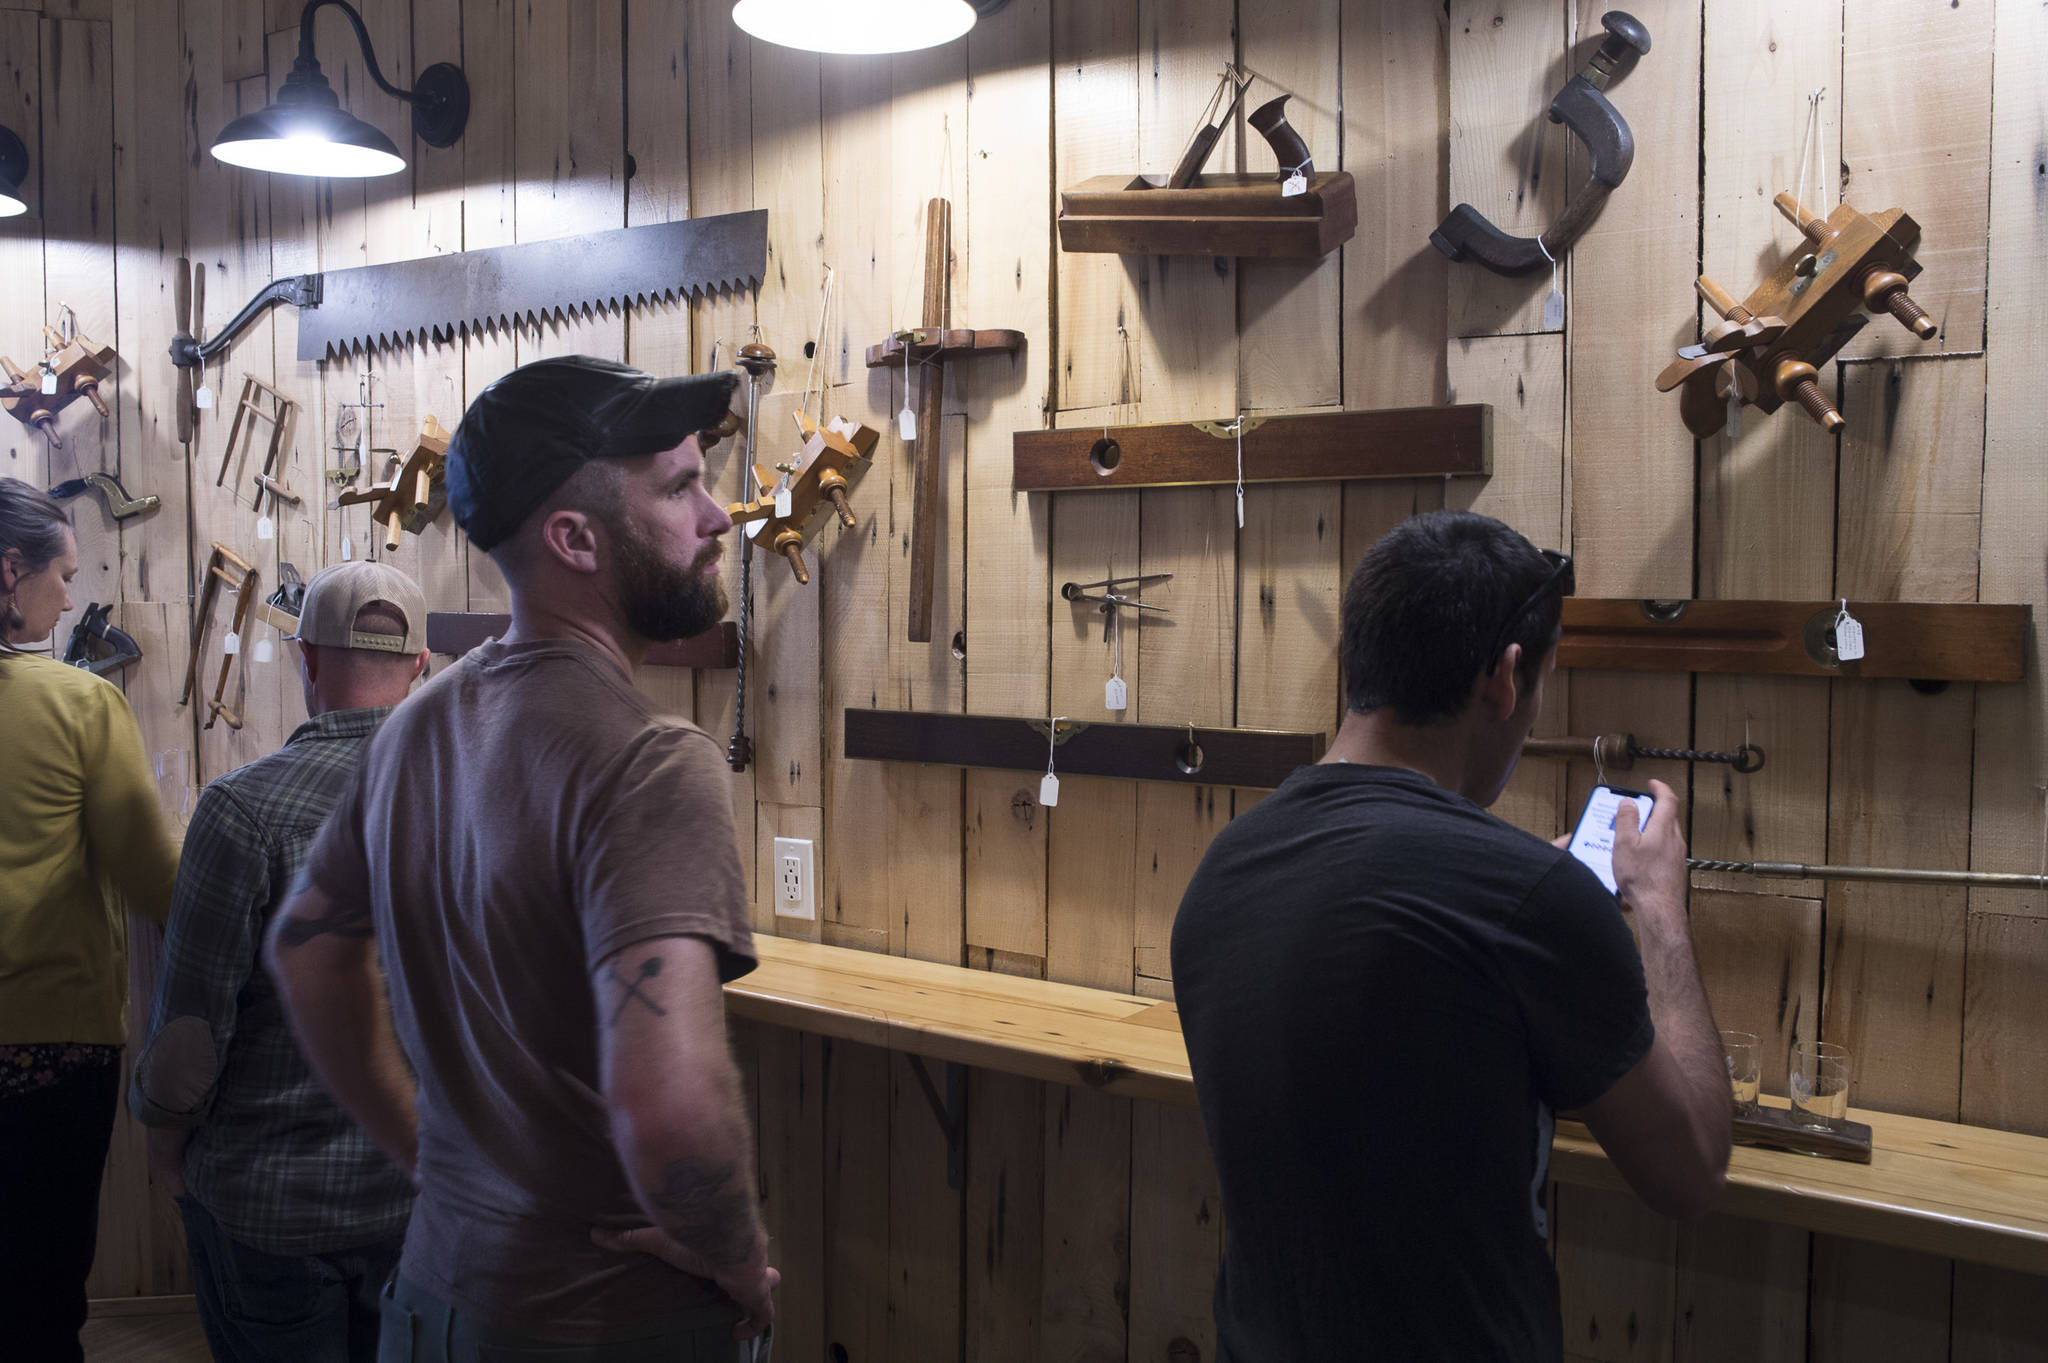 Ryan O’Shaughnessy studies the collection of antique woodworking tools collected by Dick Wood during First Friday at Devil’s Club Brewing Company on Friday, June 7, 2019. (Michael Penn | Juneau Empire)